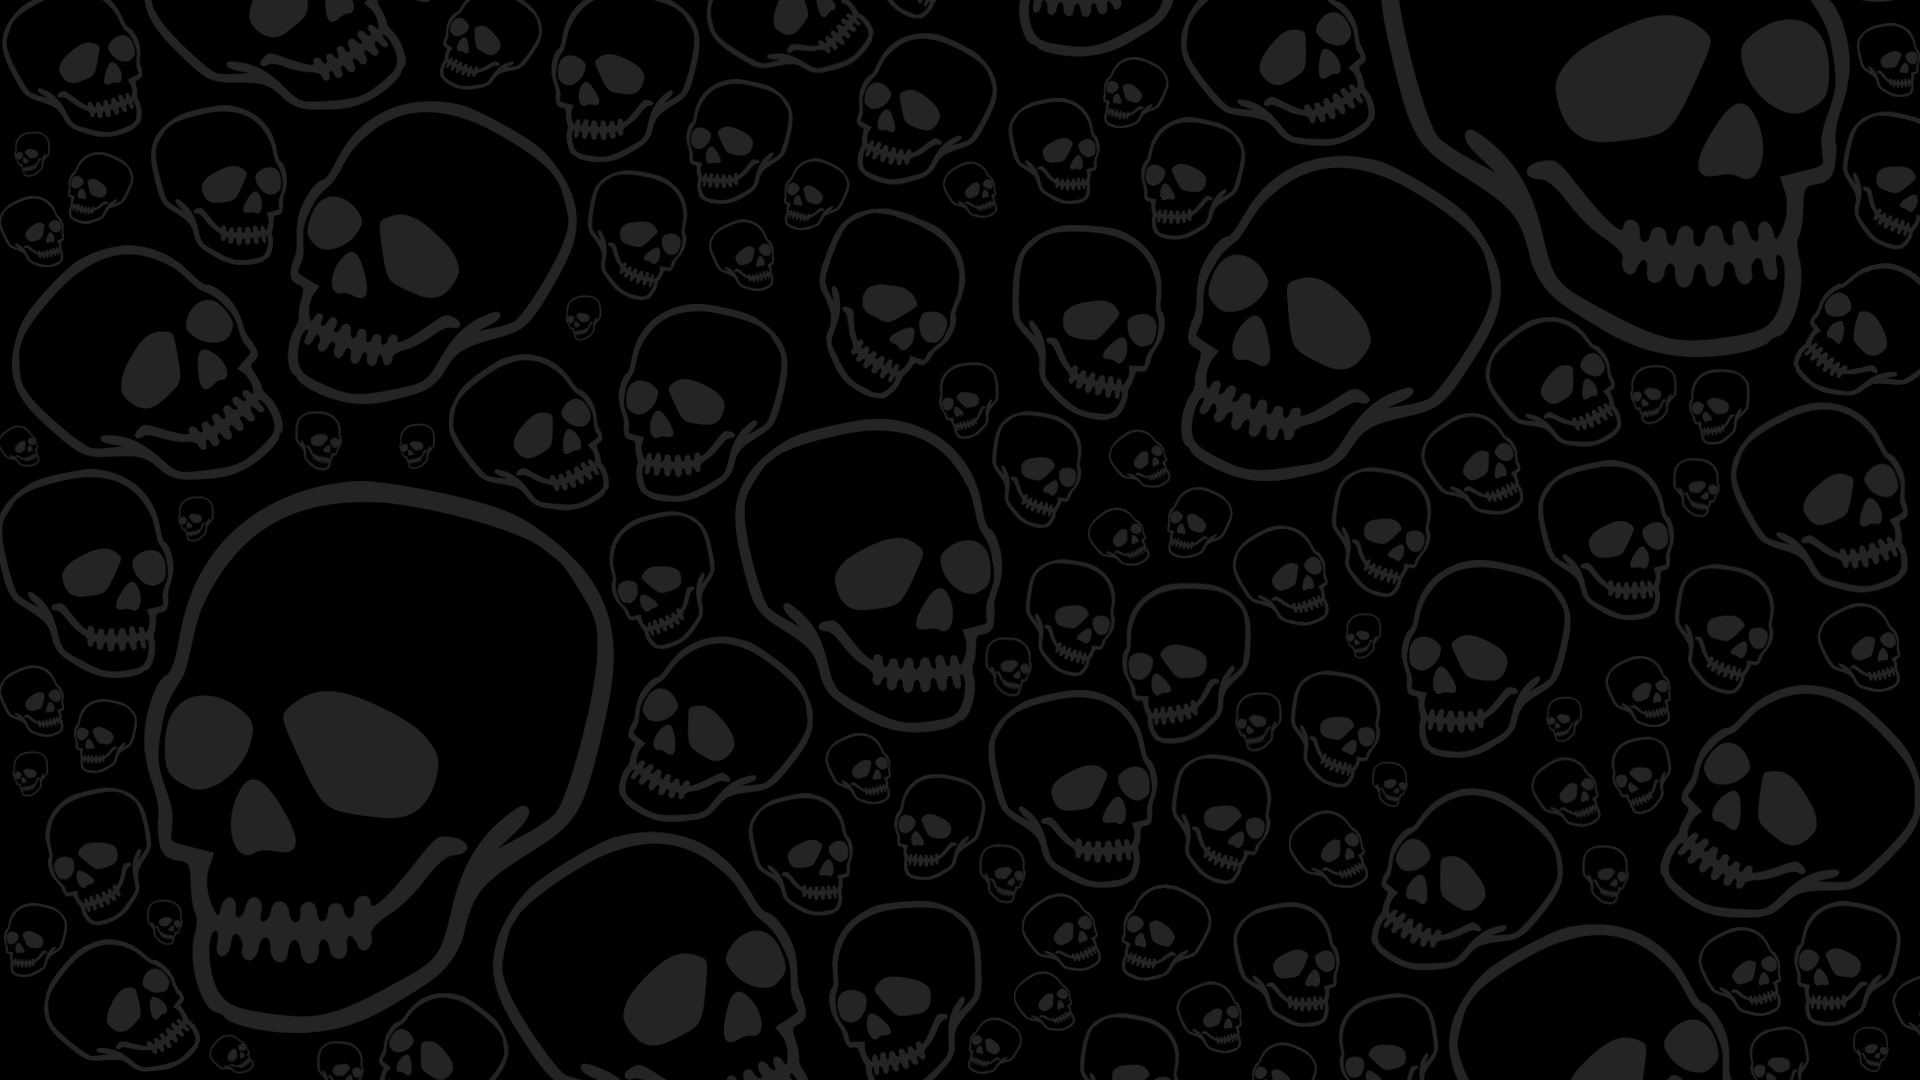 Related Pictures 3d Skull Wallpaper Gallery